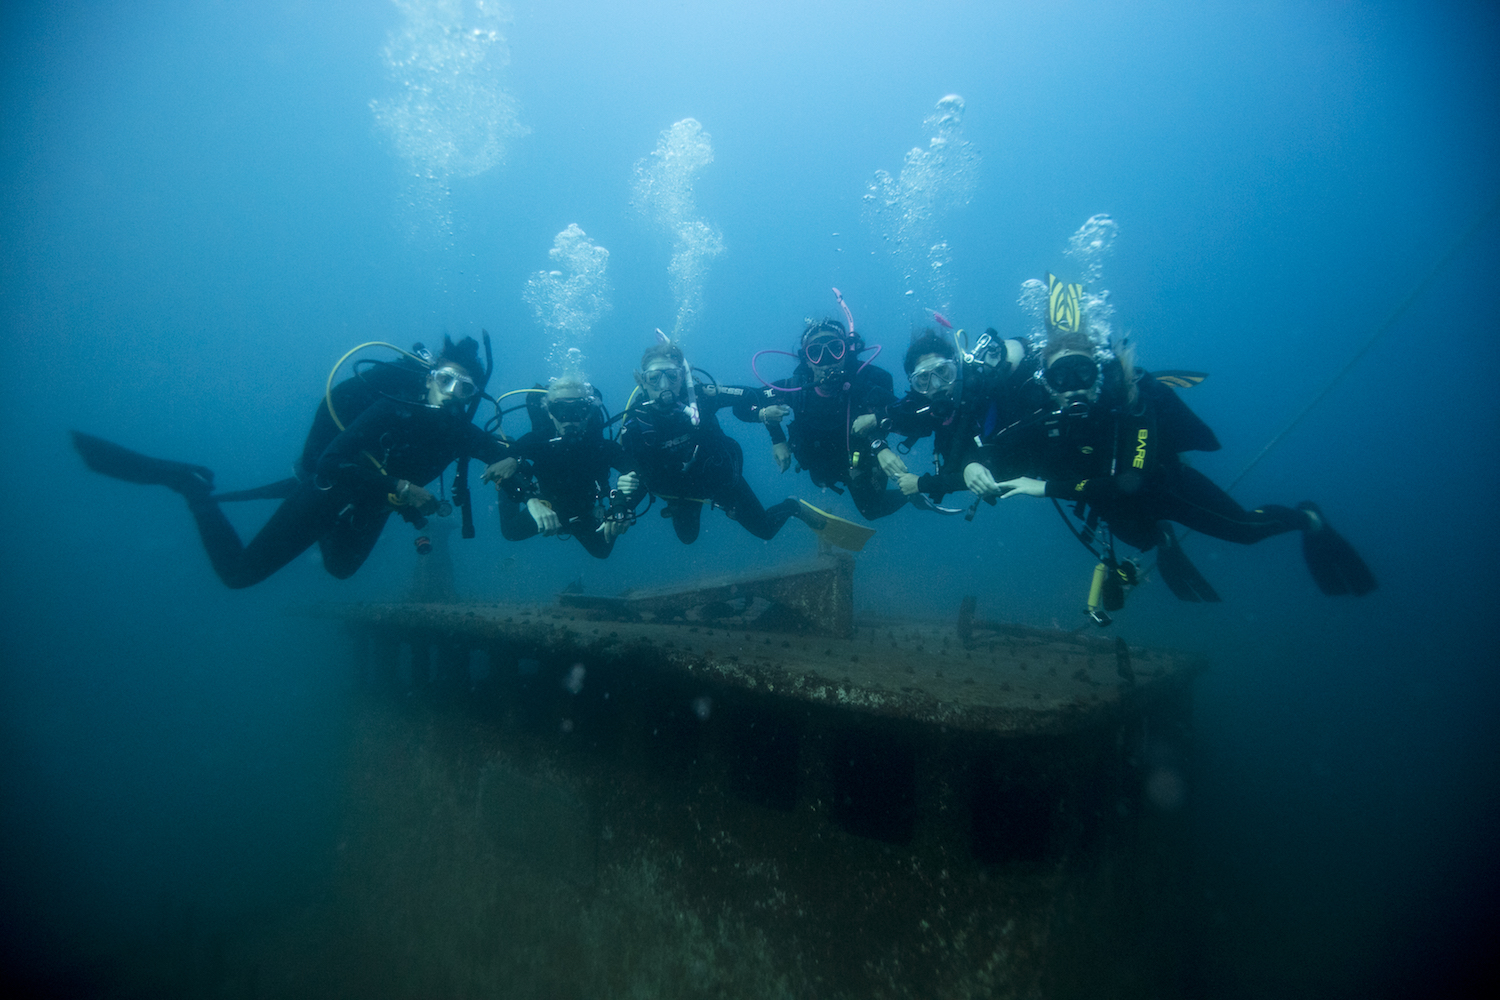 Group photo of divers underwater in La Paz Mexico